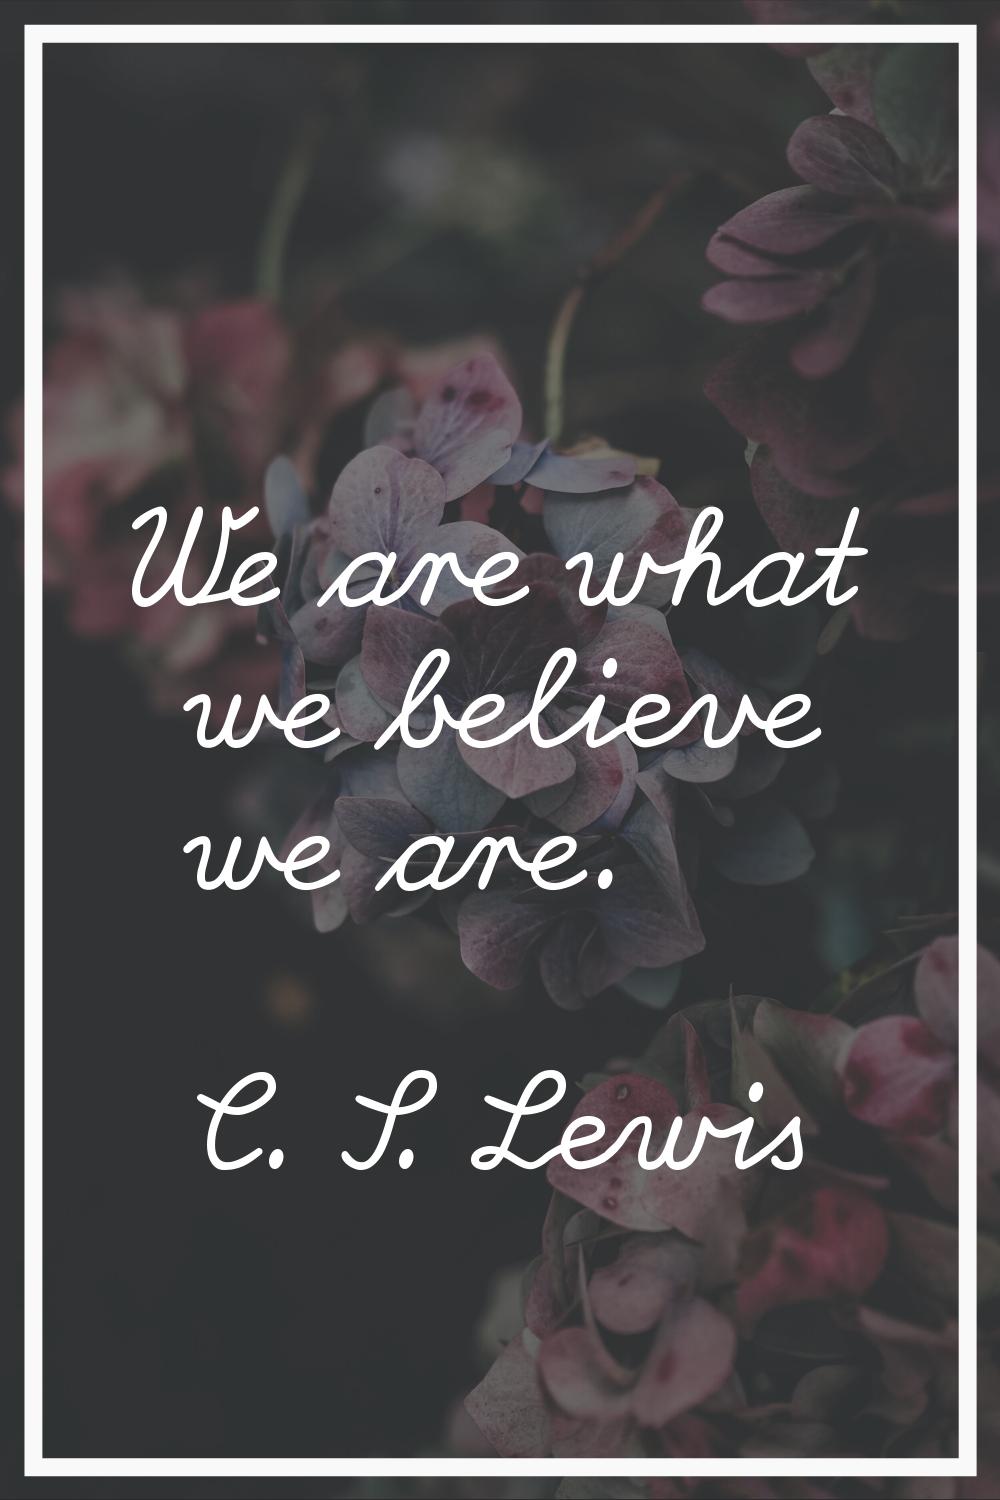 We are what we believe we are.